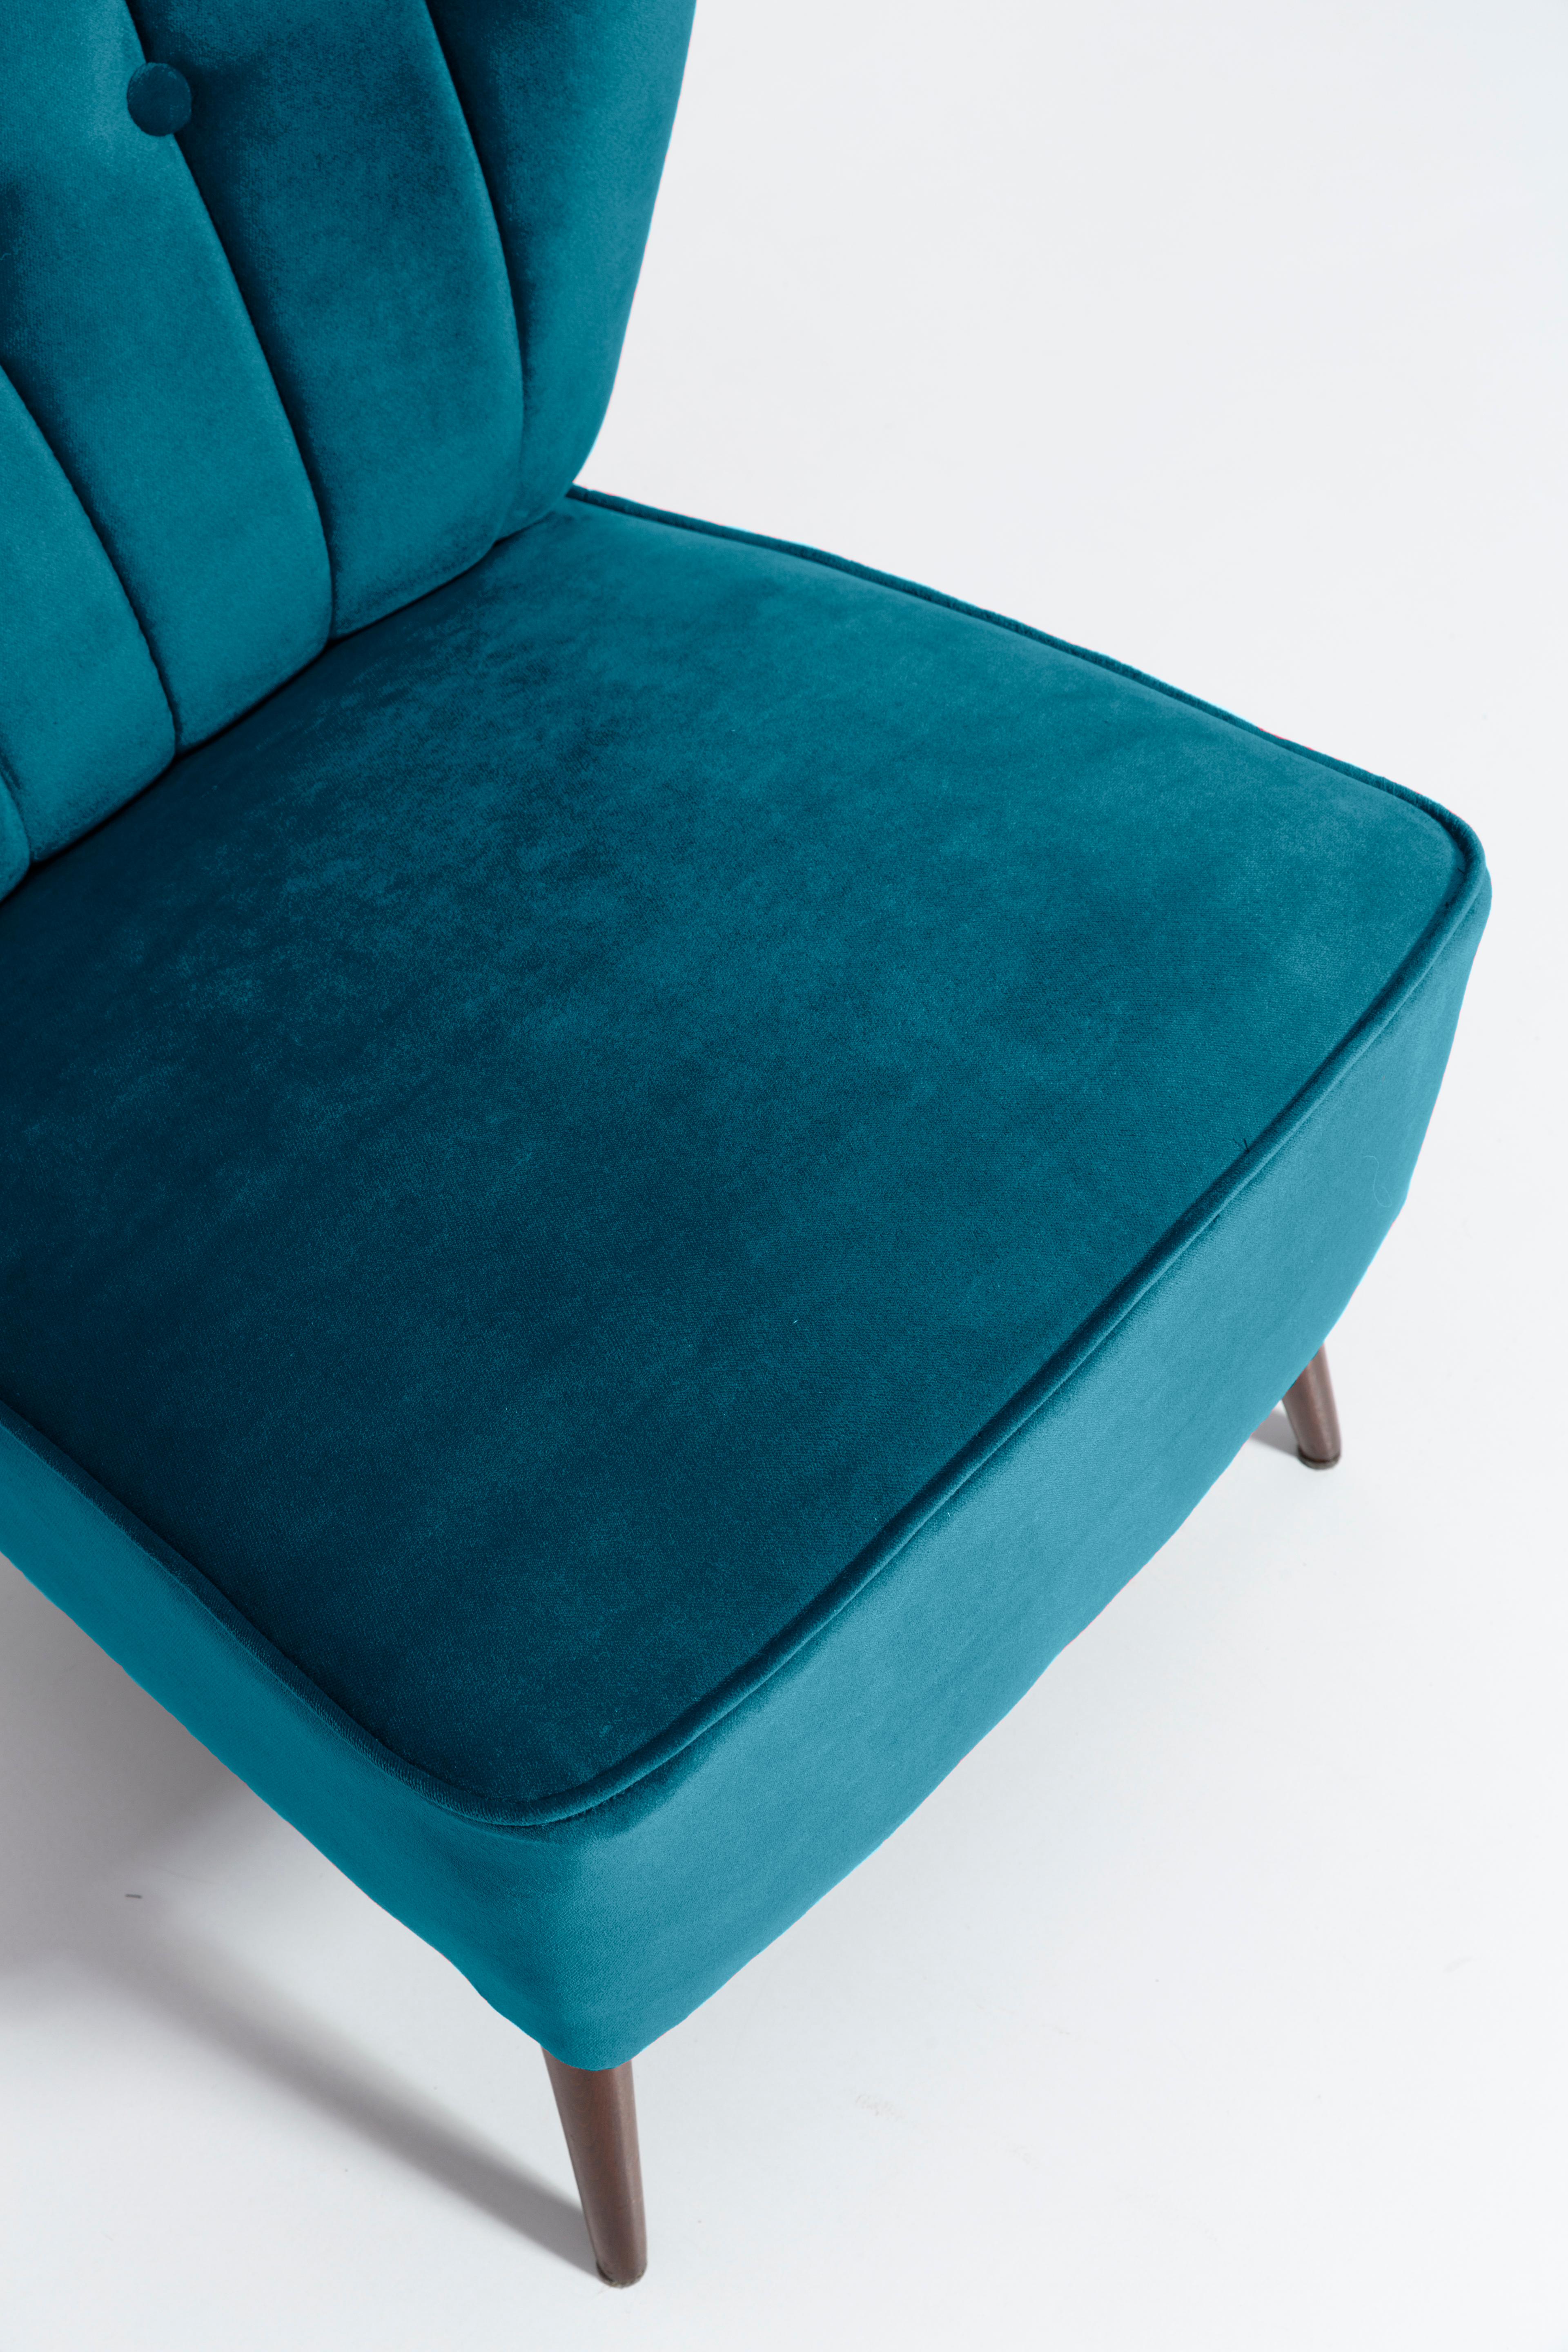 Springy, very comfortable and stabile polish club seat. Produced in the 1960s at the Karl Lindner factory in Germany. Original Vintage amazing furniture. The whole armchair is covered with high-quality italian petrol blue velour (color 973). Very